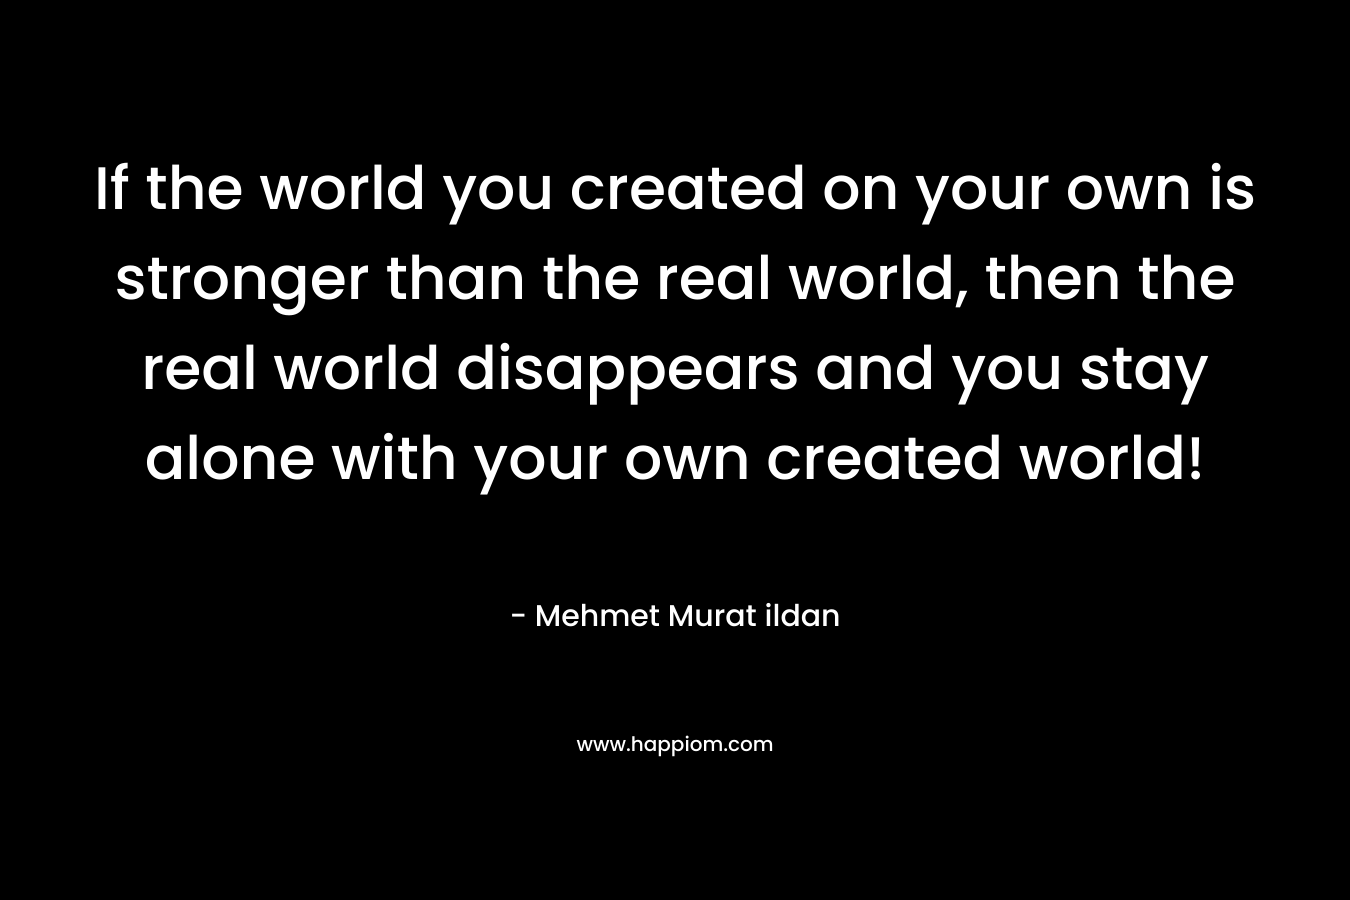 If the world you created on your own is stronger than the real world, then the real world disappears and you stay alone with your own created world!